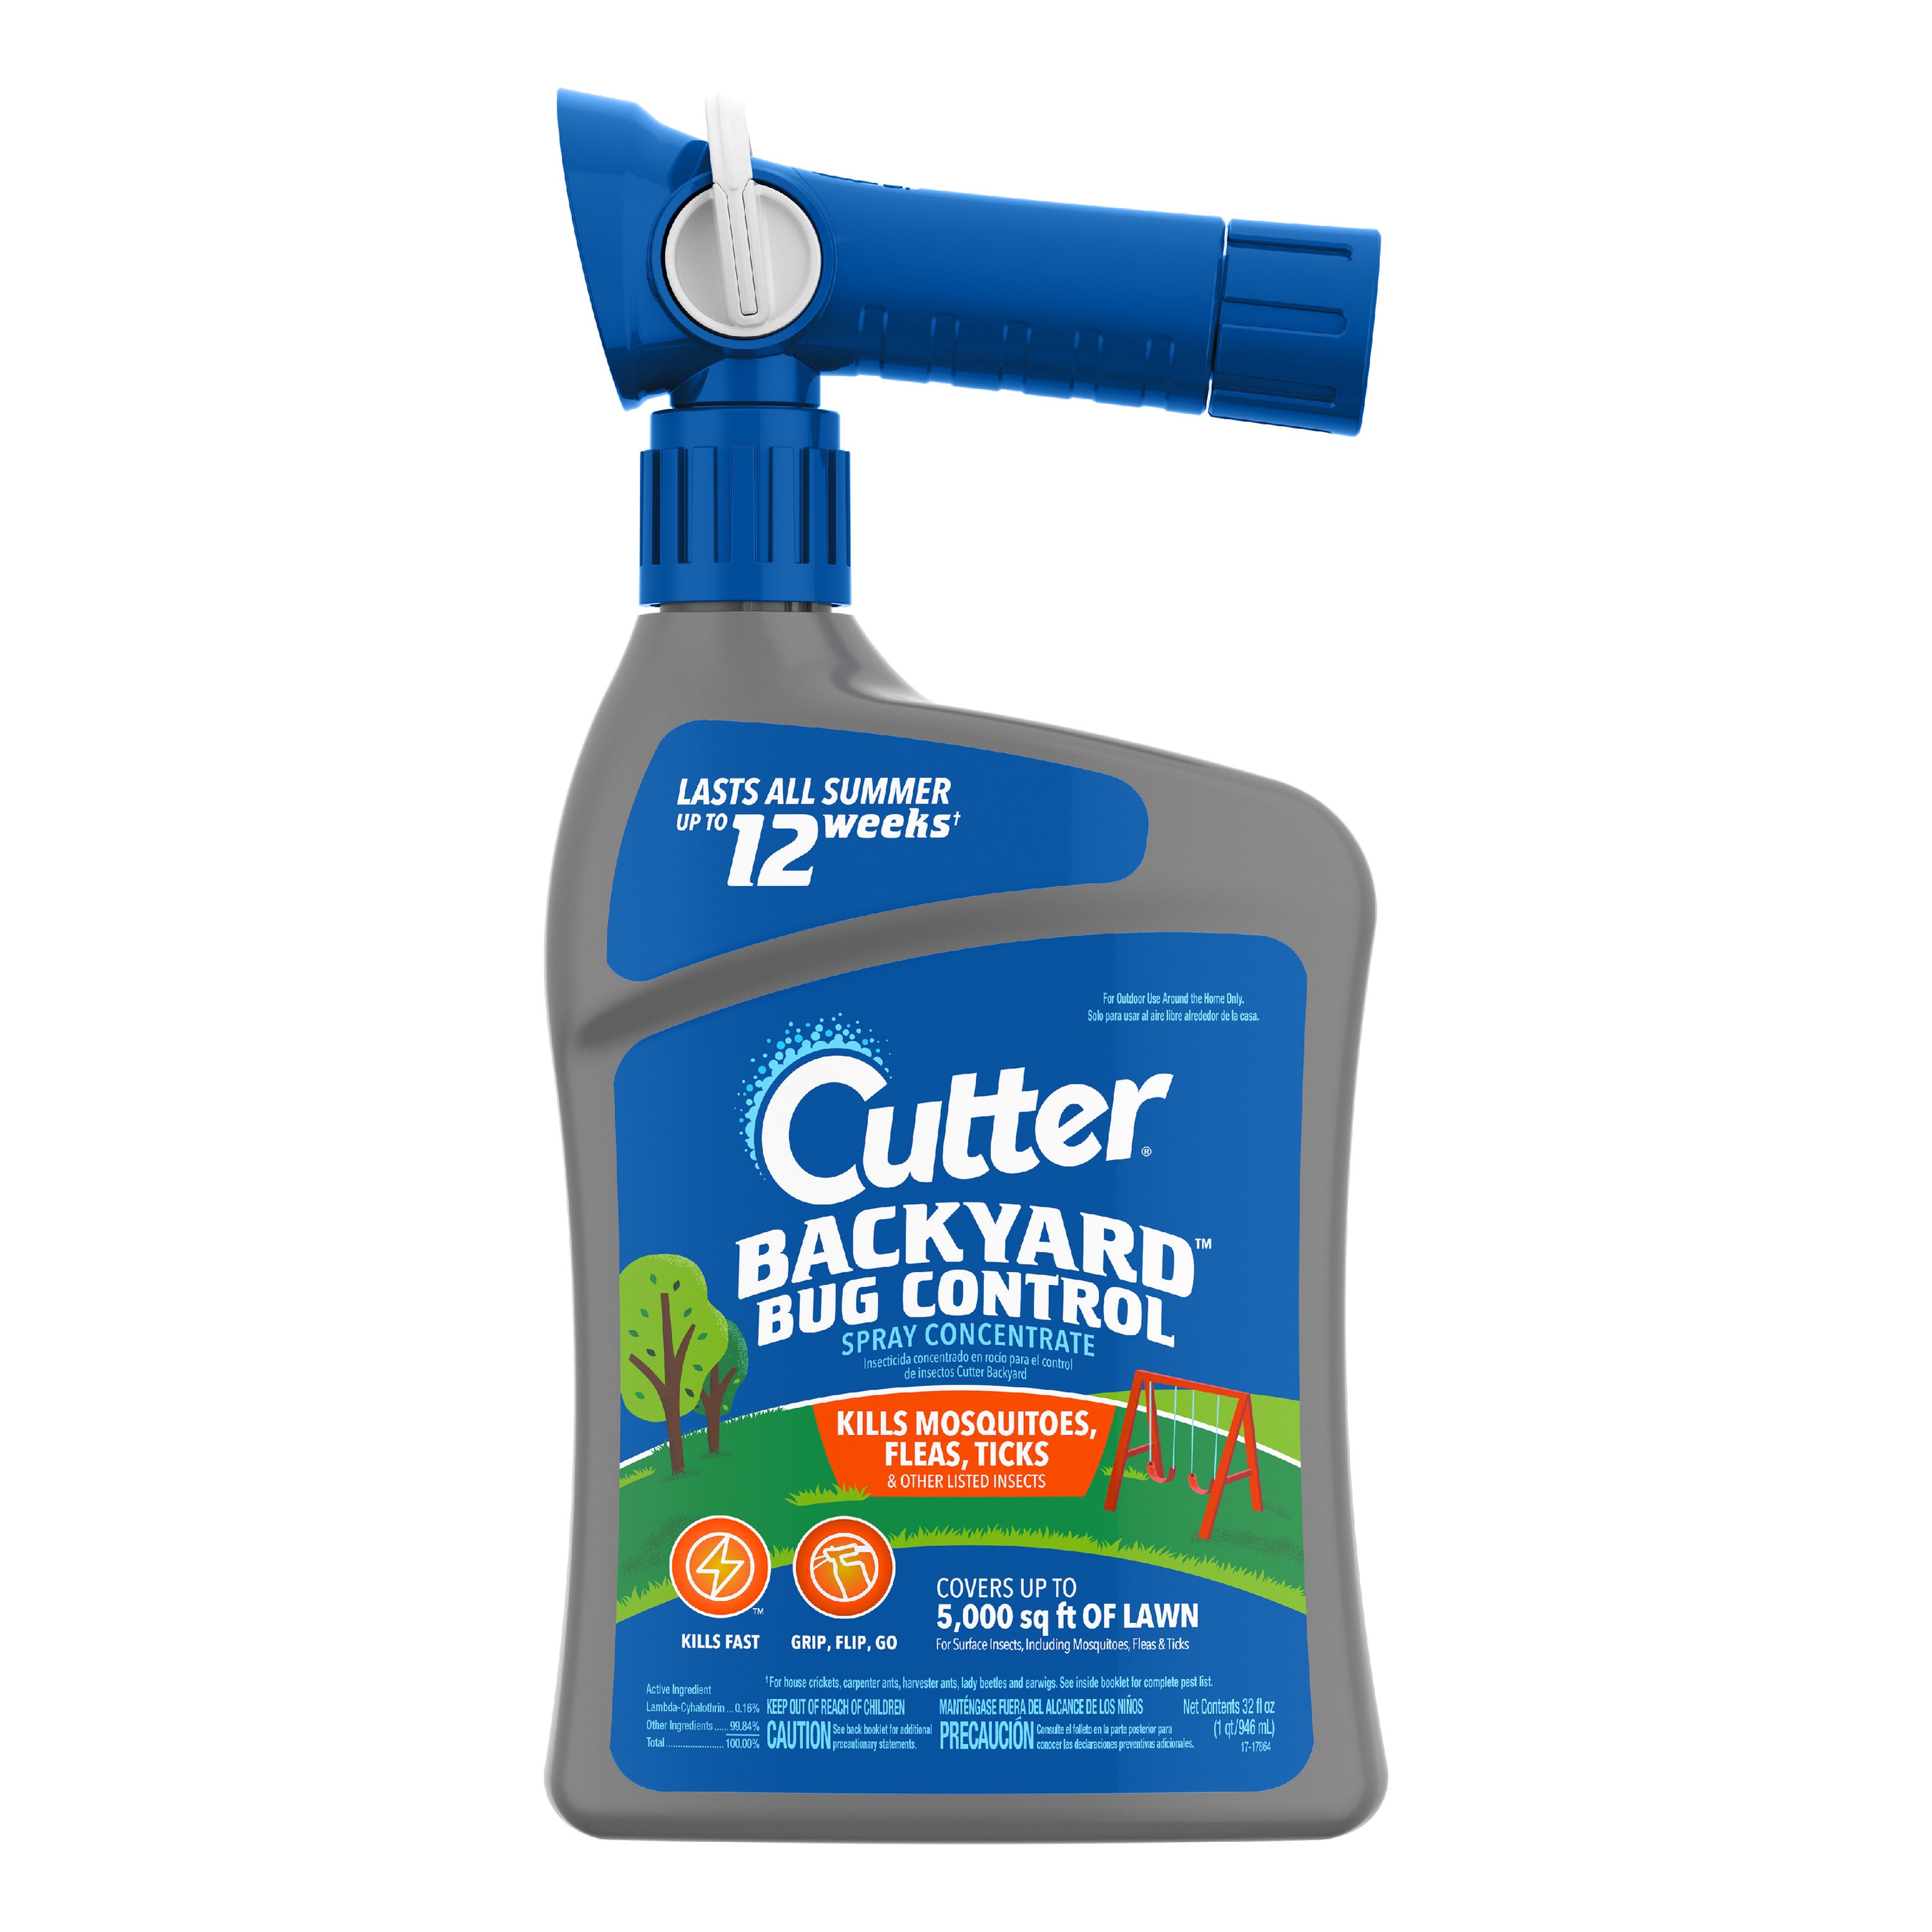 32-Oz Cutter Concentrate Backyard Bug Control Bug Spray Hose End Sprayer $7.50 + Free Store Pickup at Lowes